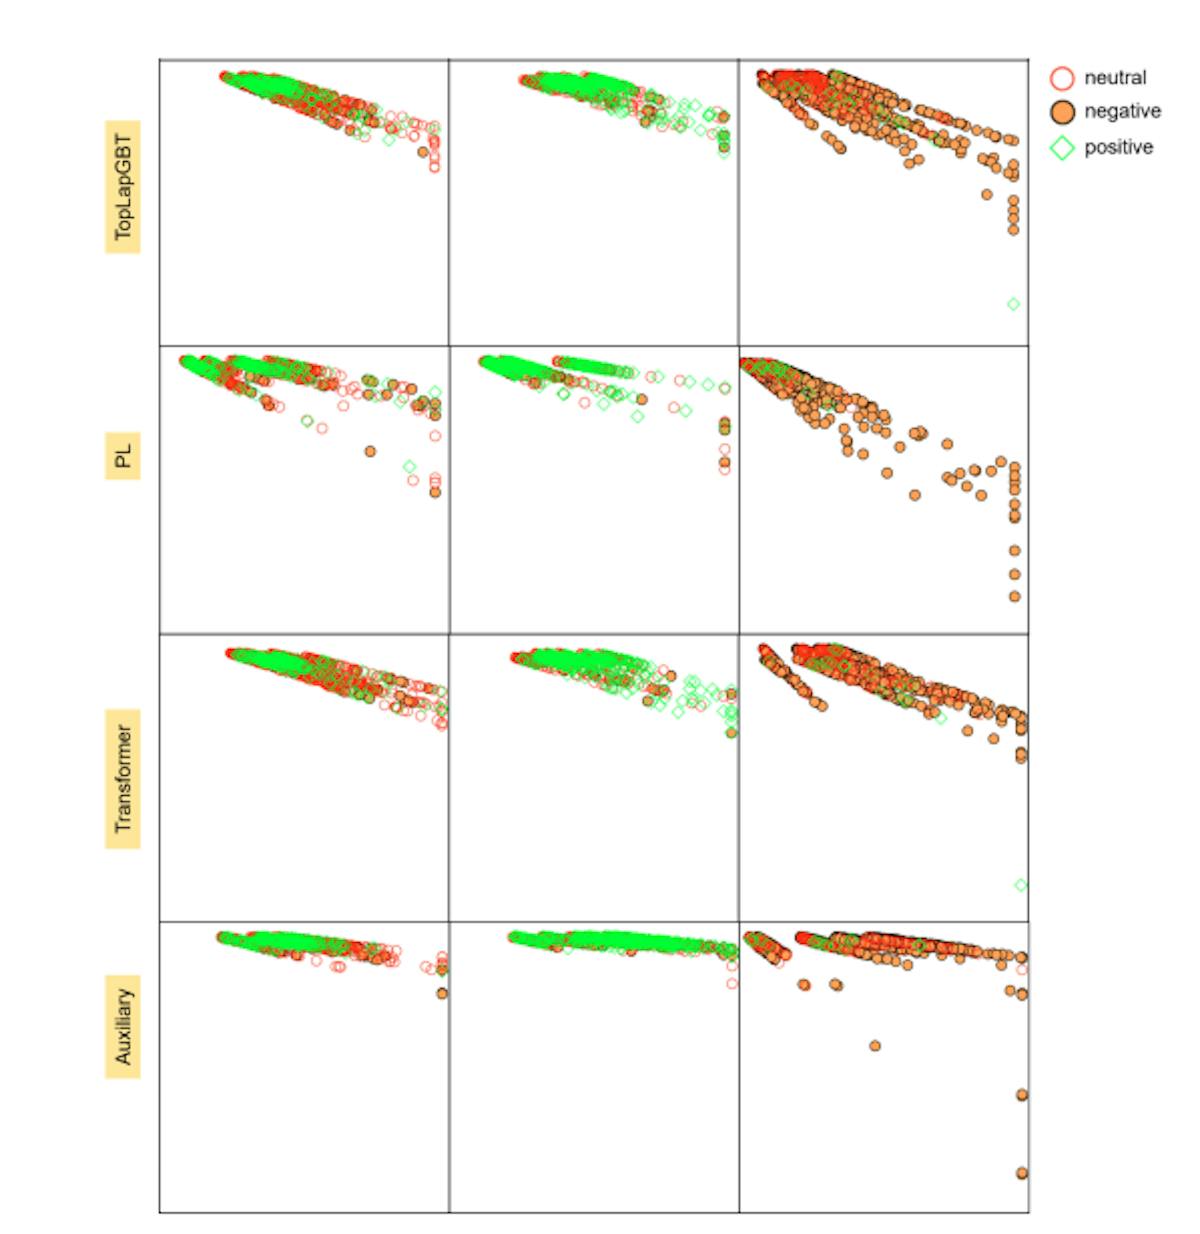  Figure 4: The comparison of R-S plots between the different types of features used in TopLapGBT model. The y-axis represents the residue score, whereas the x-axis represents the similarity score. RS scores were computed for the testing set, and all 10-folds were visualized. Each section corresponds to one of the 3 true solubility labels, and the sample’s color and marker correspond to the predicted label from TopLapGBT.